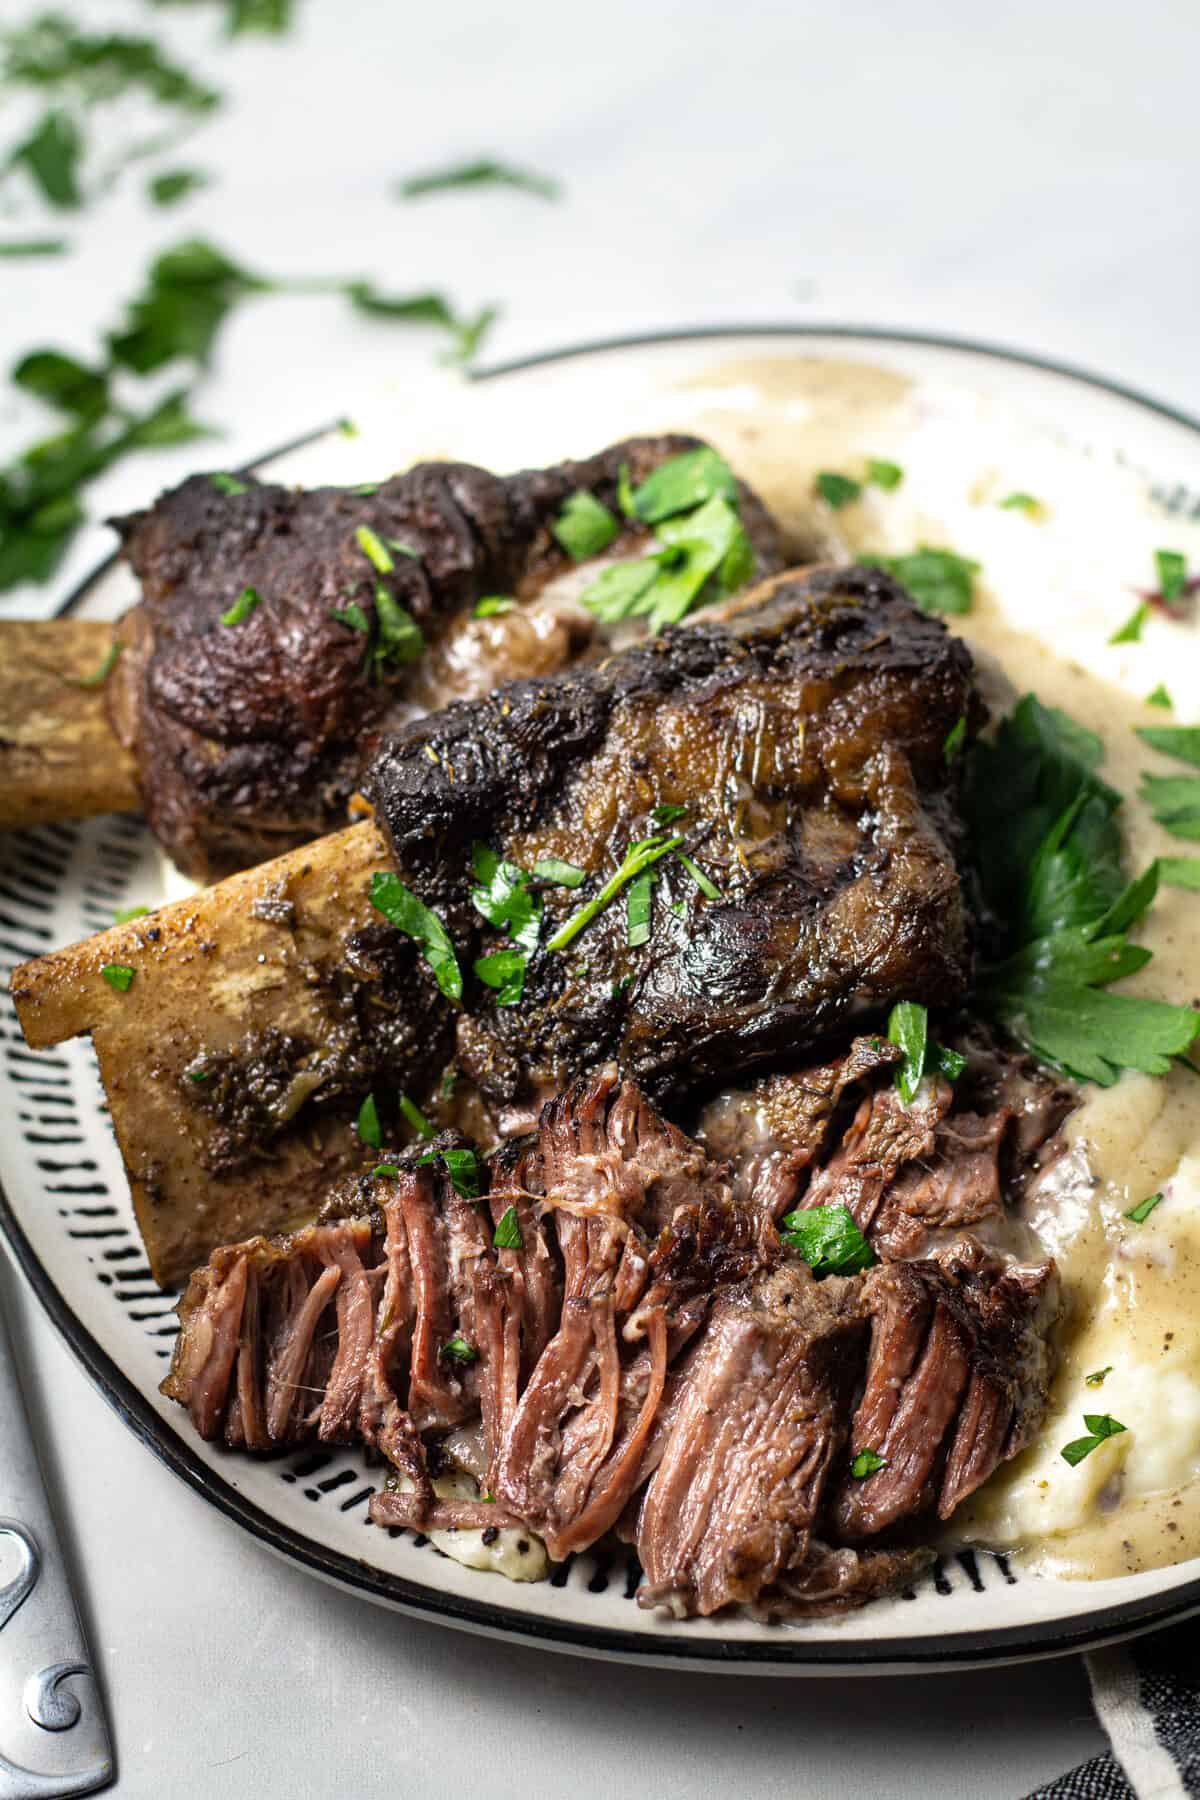 Overhead shot of a plate filled with short ribs and homemade mashed potatoes garnished with parsley 